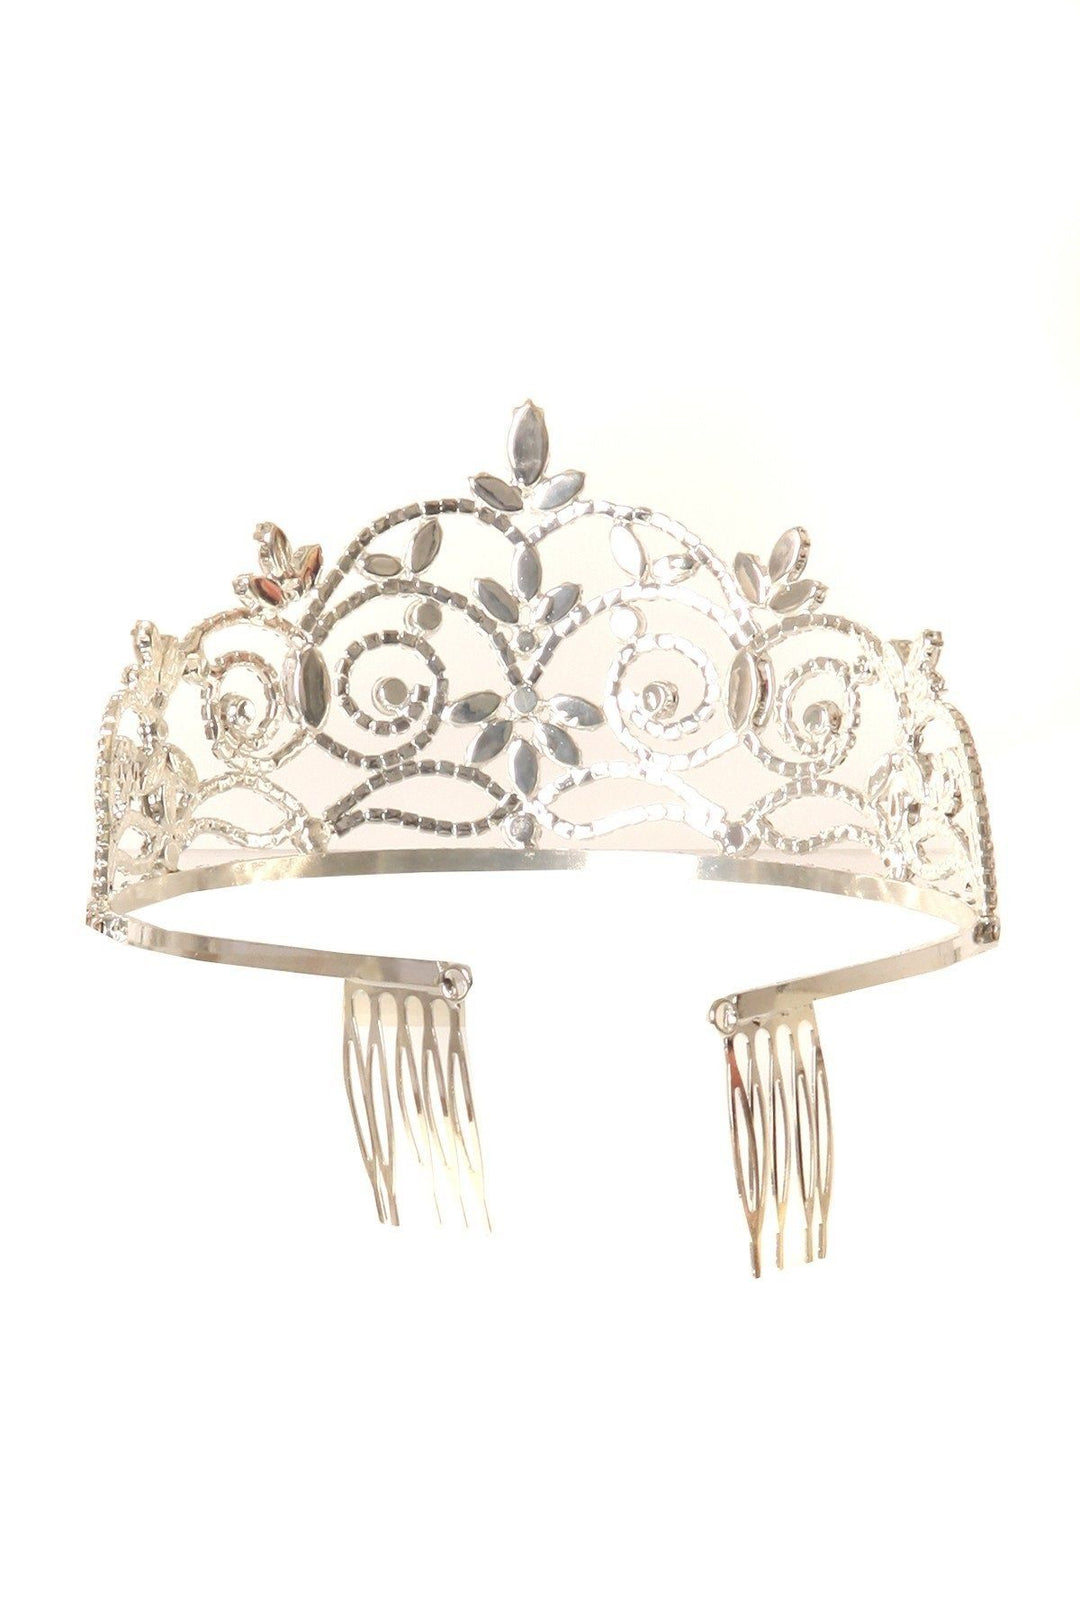 Girls Silver Floral Tiara with Comb